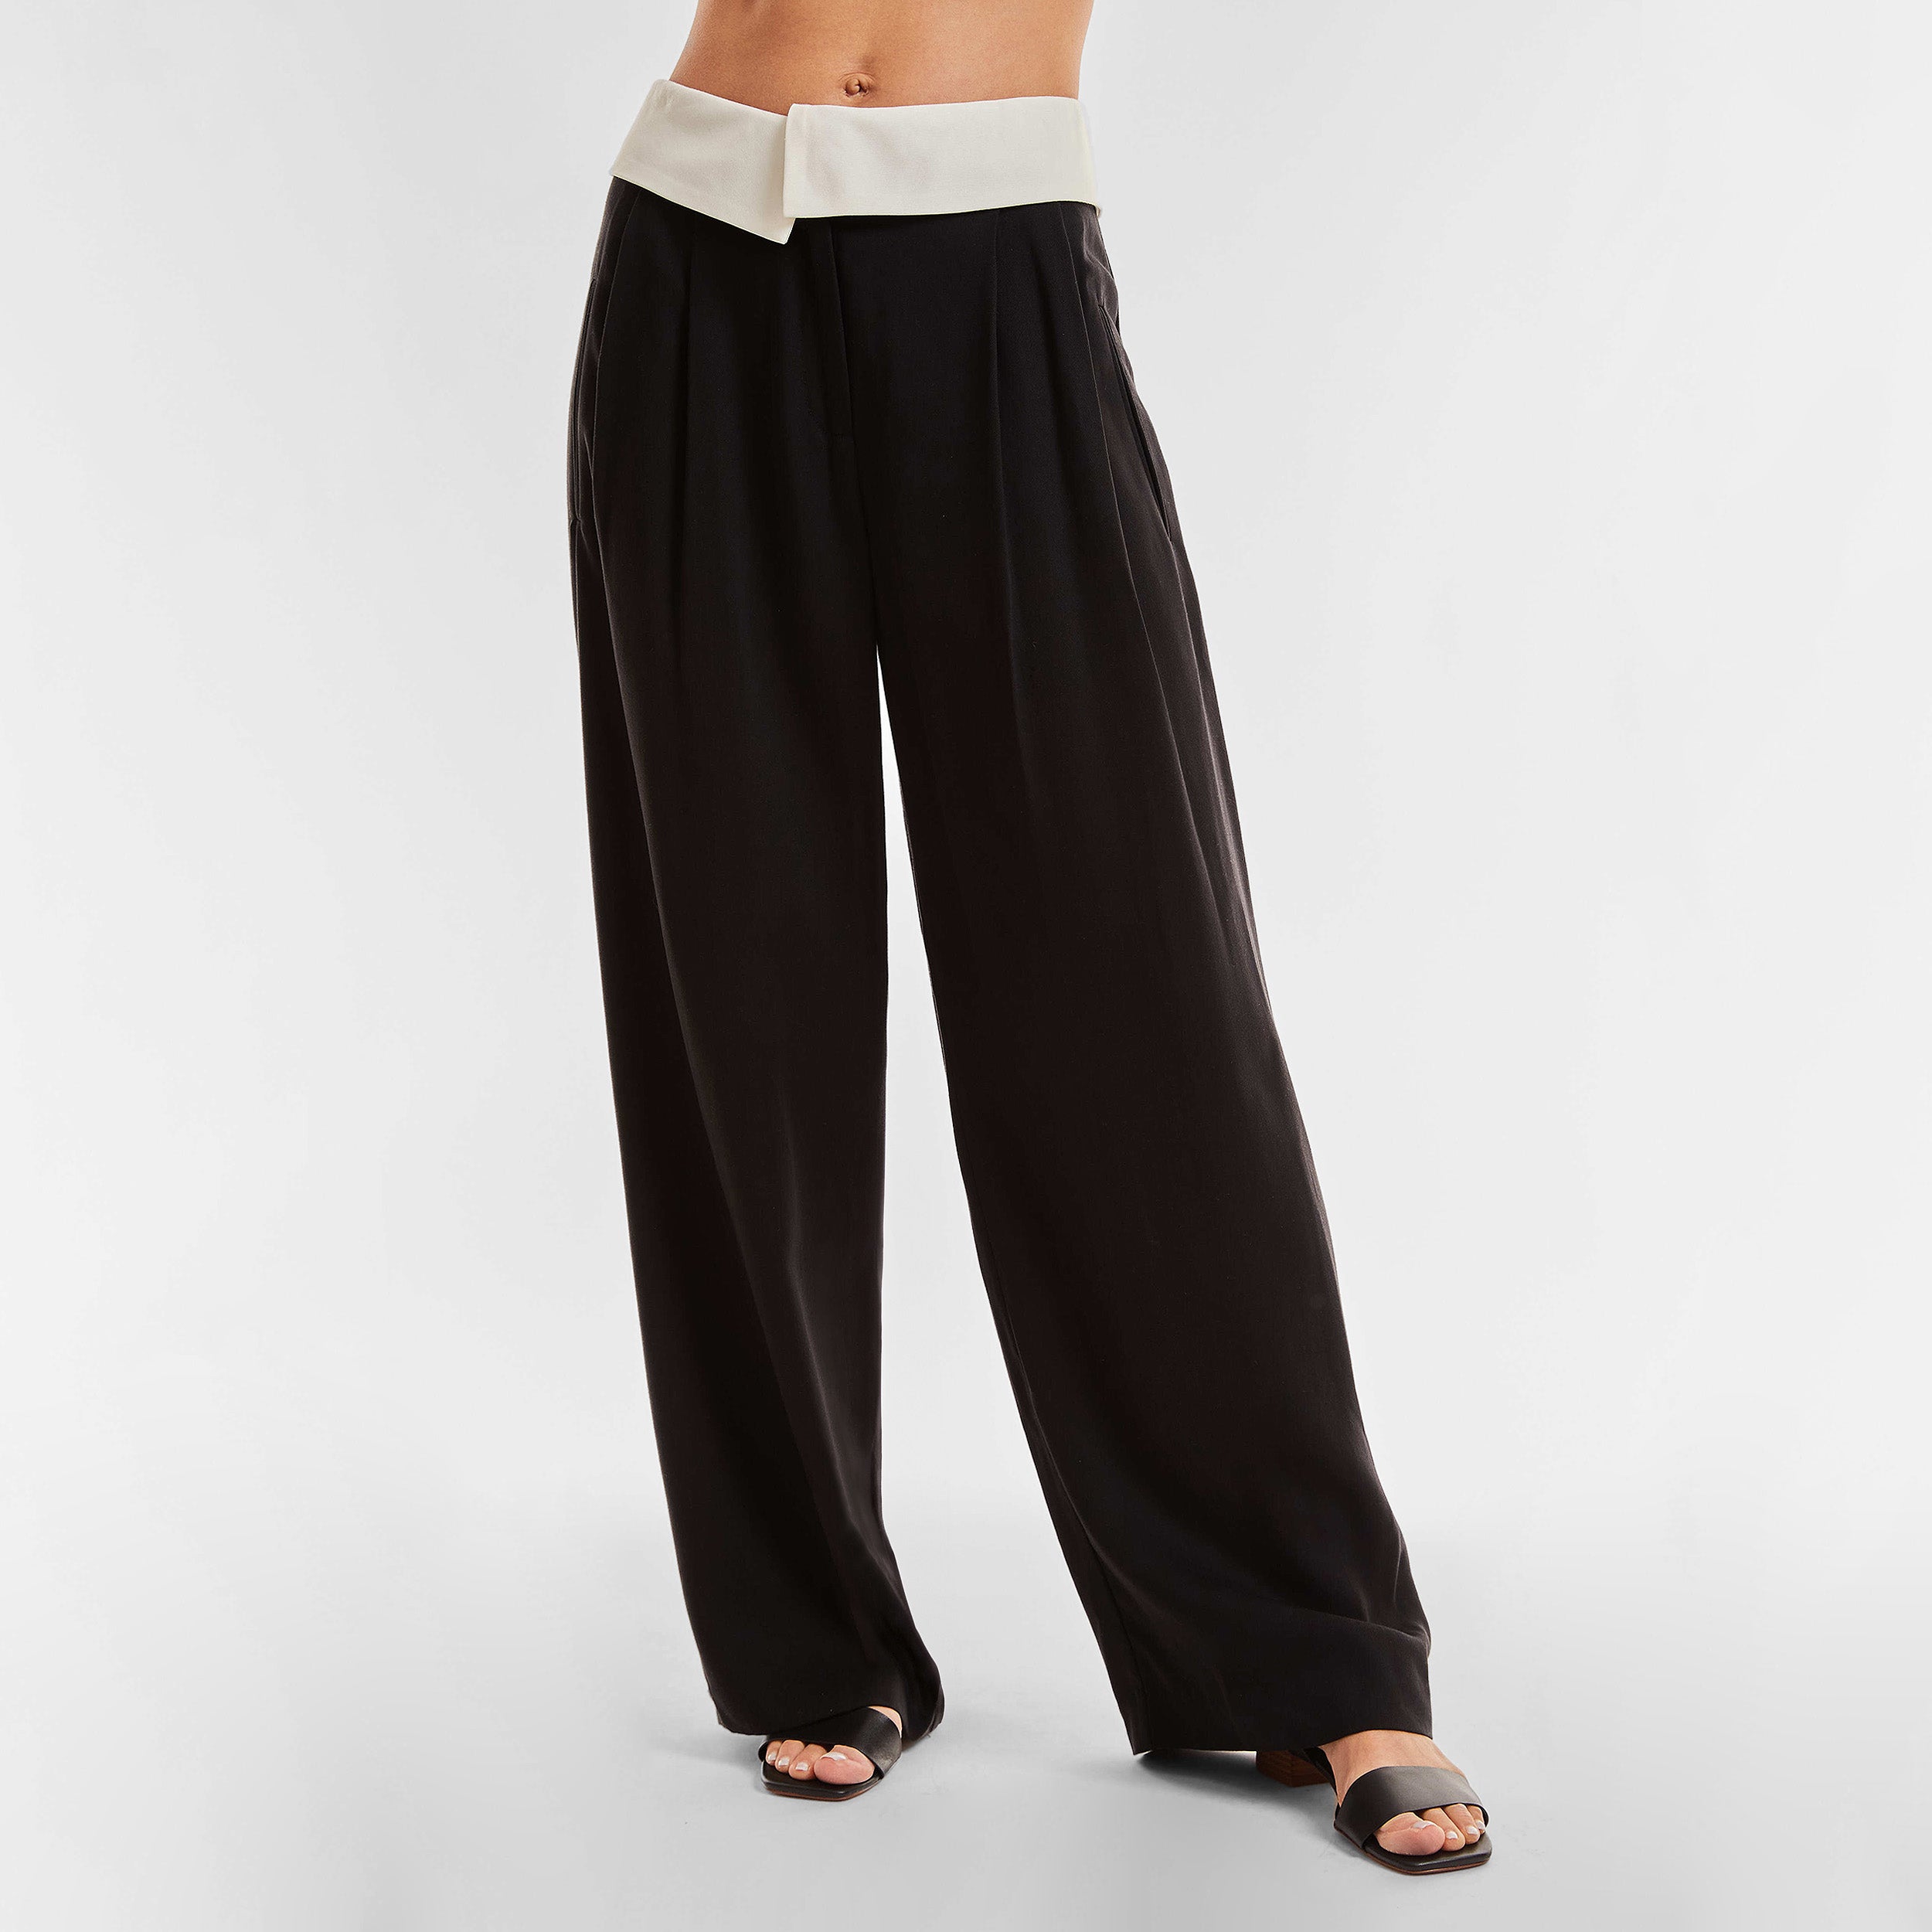 Front view of woman wearing black trousers with white foldover waistband detail.